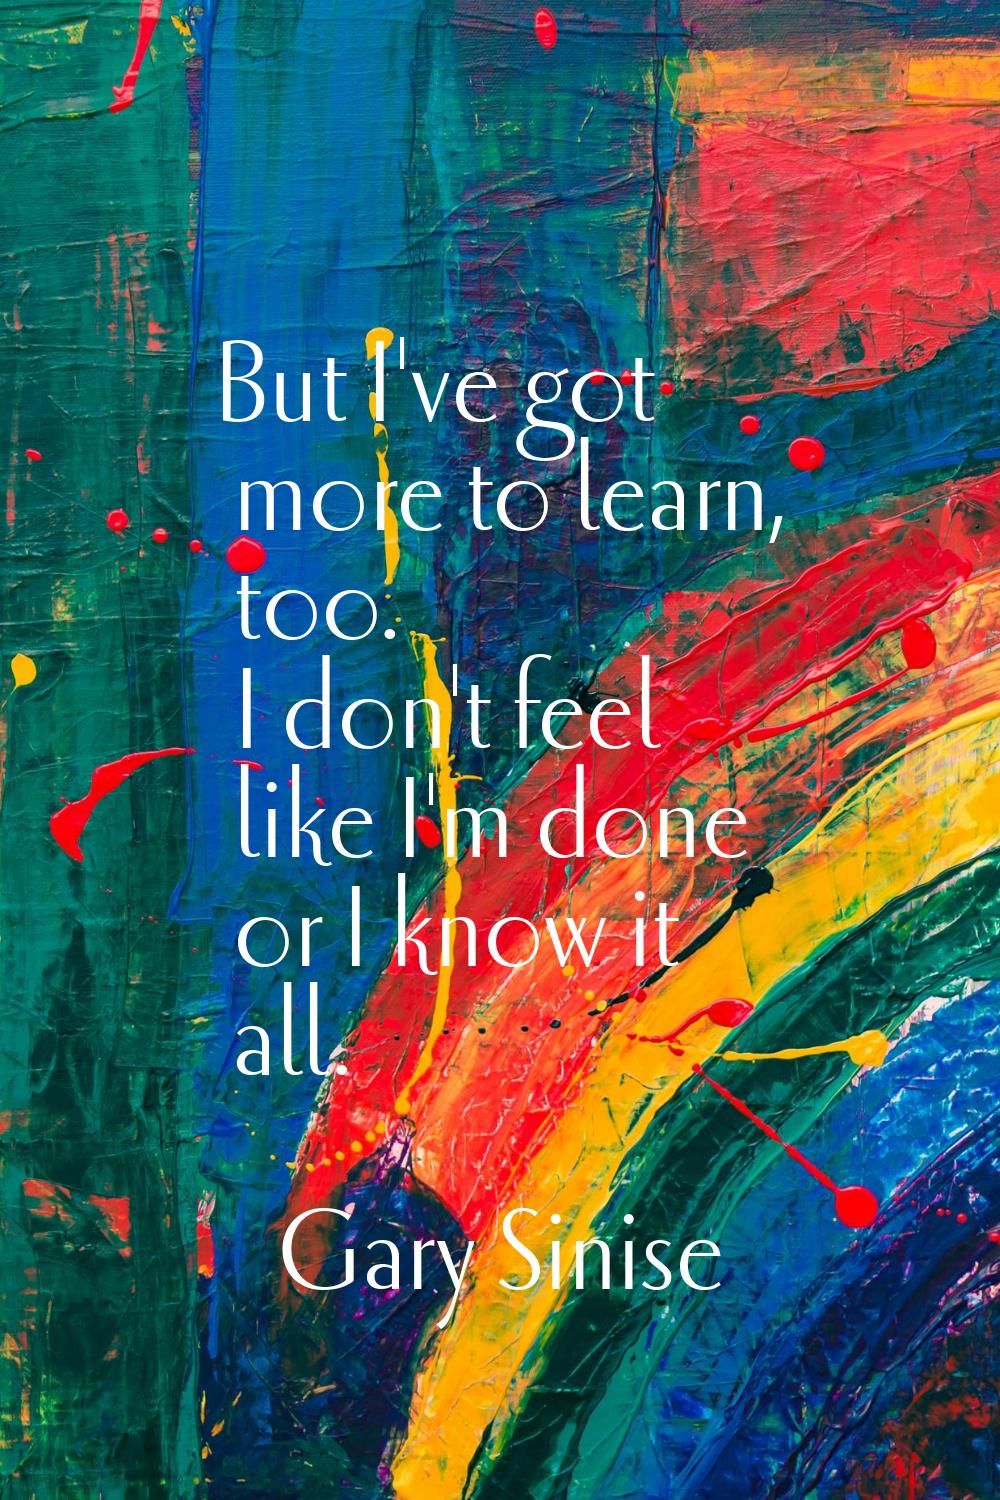 But I've got more to learn, too. I don't feel like I'm done or I know it all.